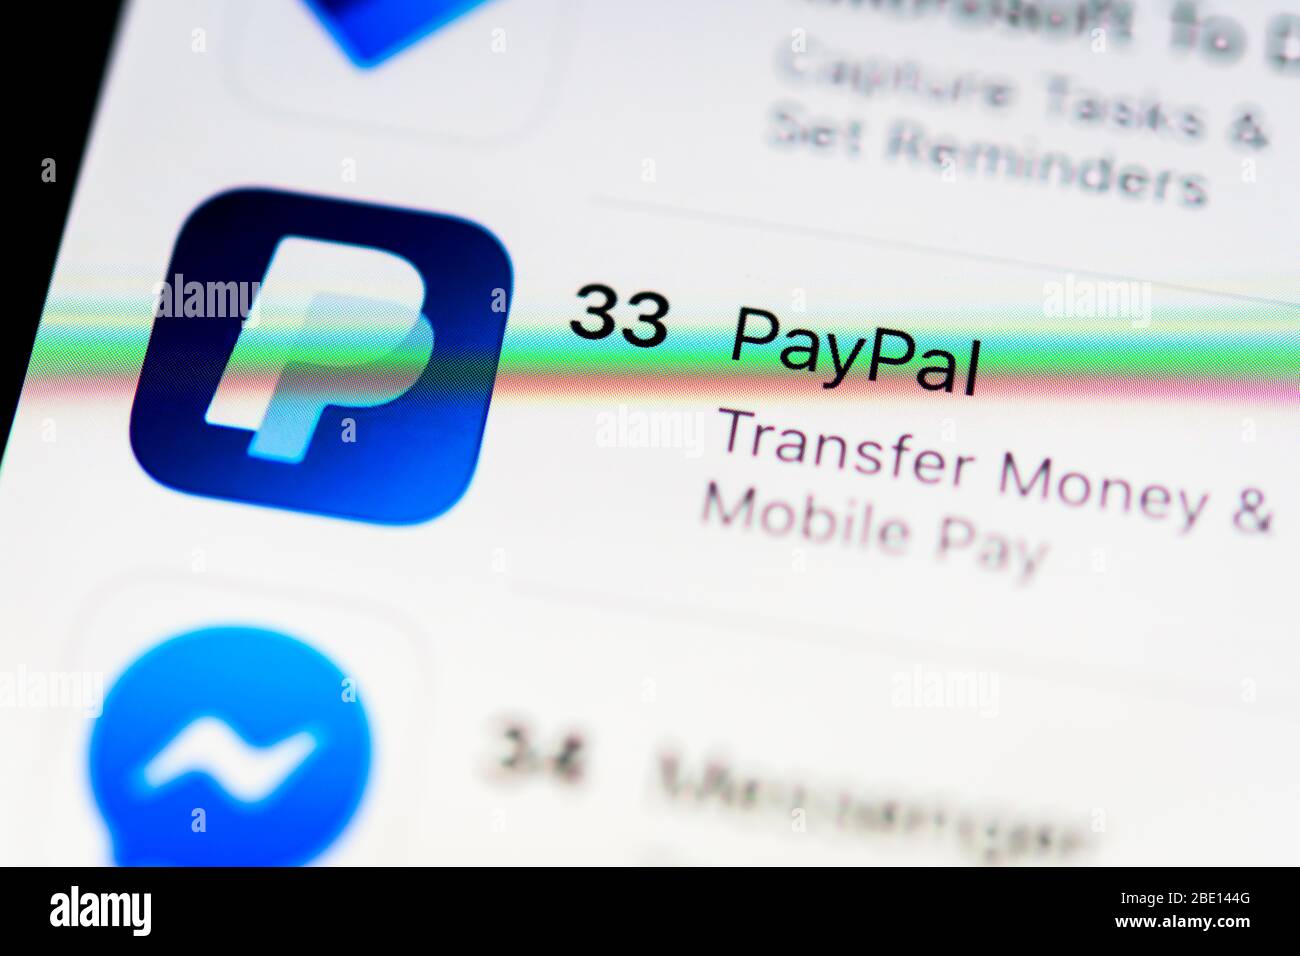 Paypal App in the Apple App Store, online banking, app icon, detail, full format Stock Photo